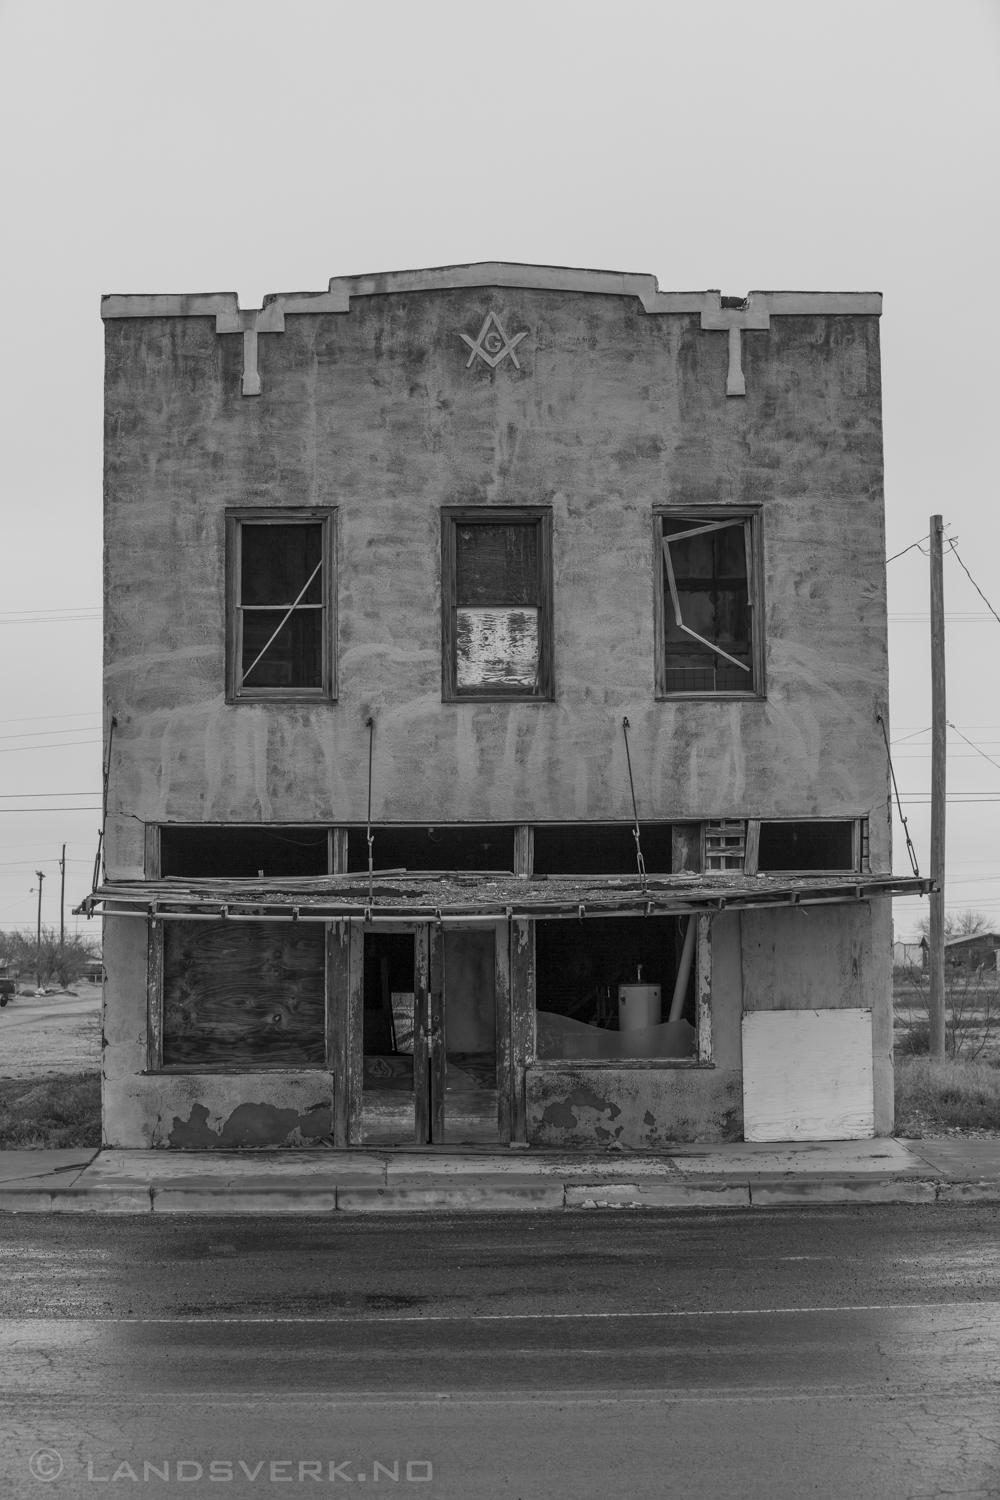 Barstow ghost town, Texas. 

(Canon EOS 5D Mark III / Canon EF 70-200mm f/2.8 L IS II USM)